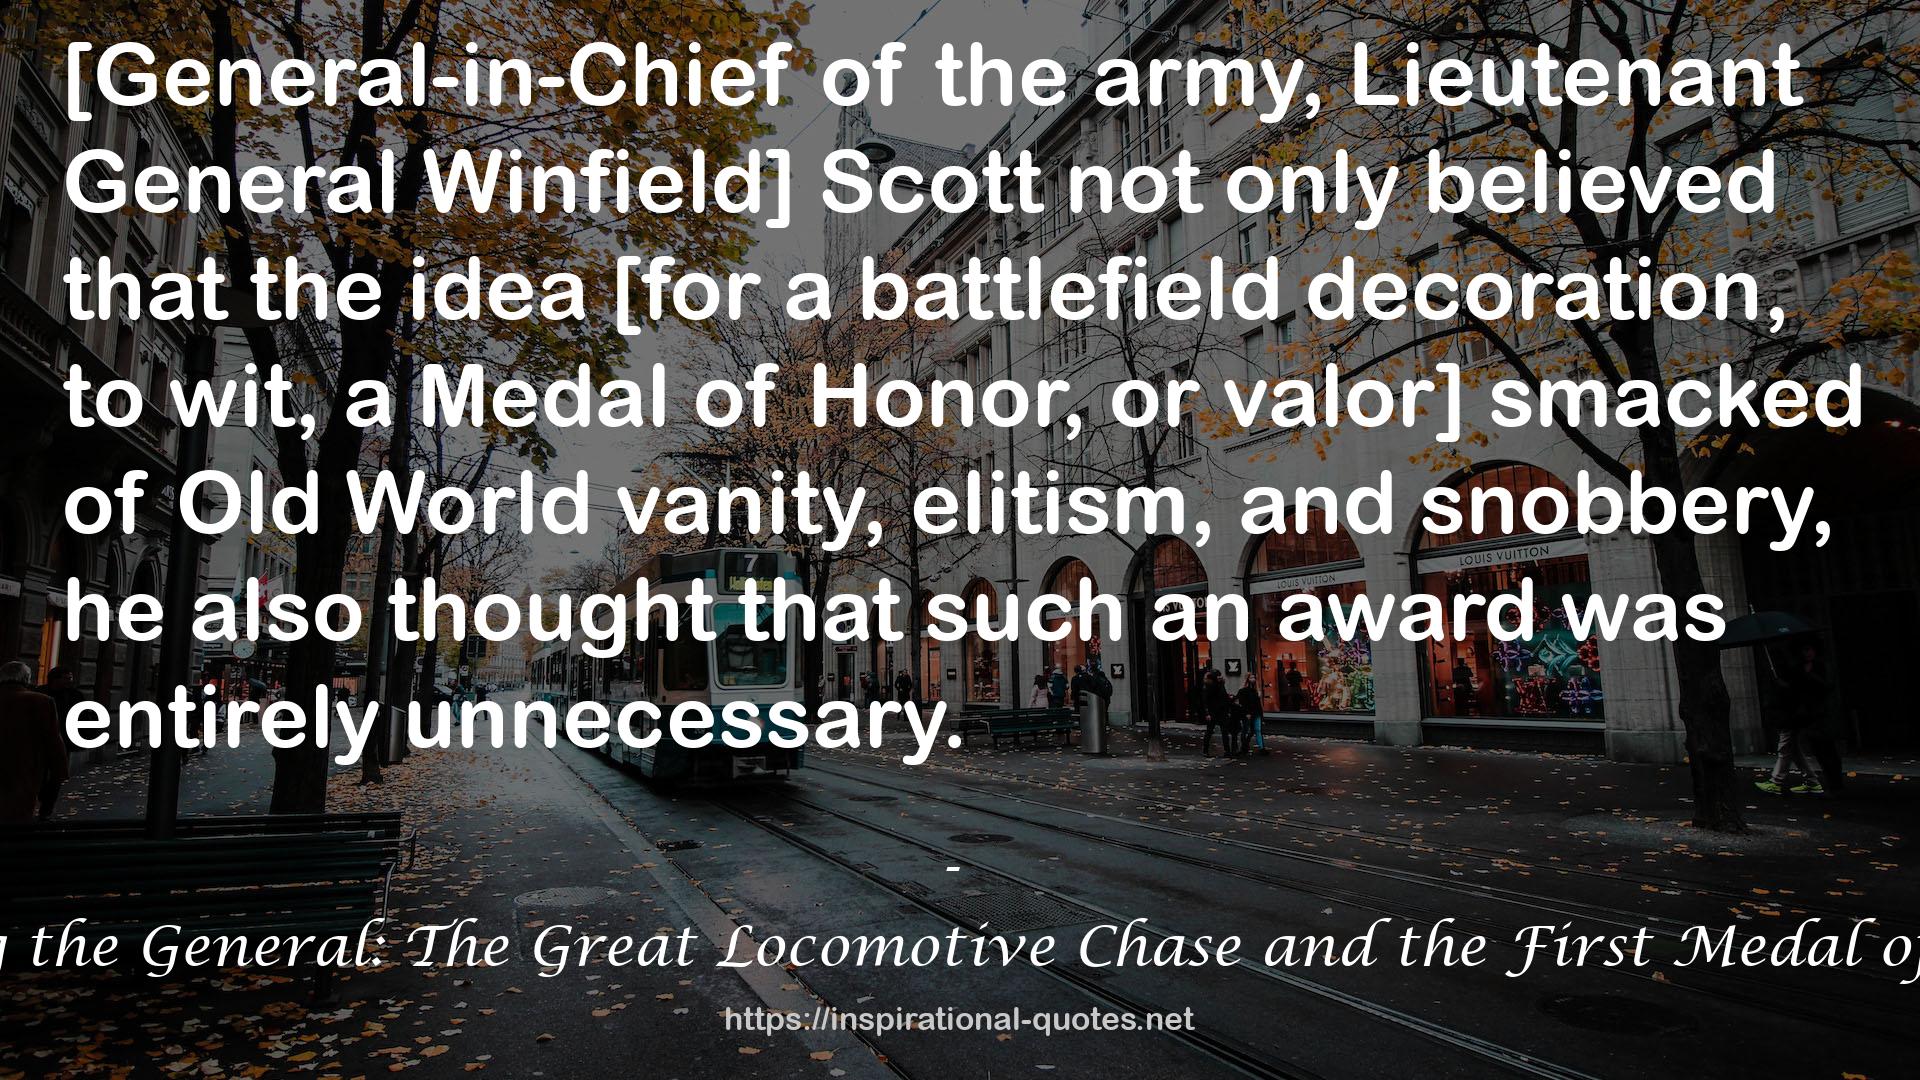 Stealing the General: The Great Locomotive Chase and the First Medal of Honor QUOTES